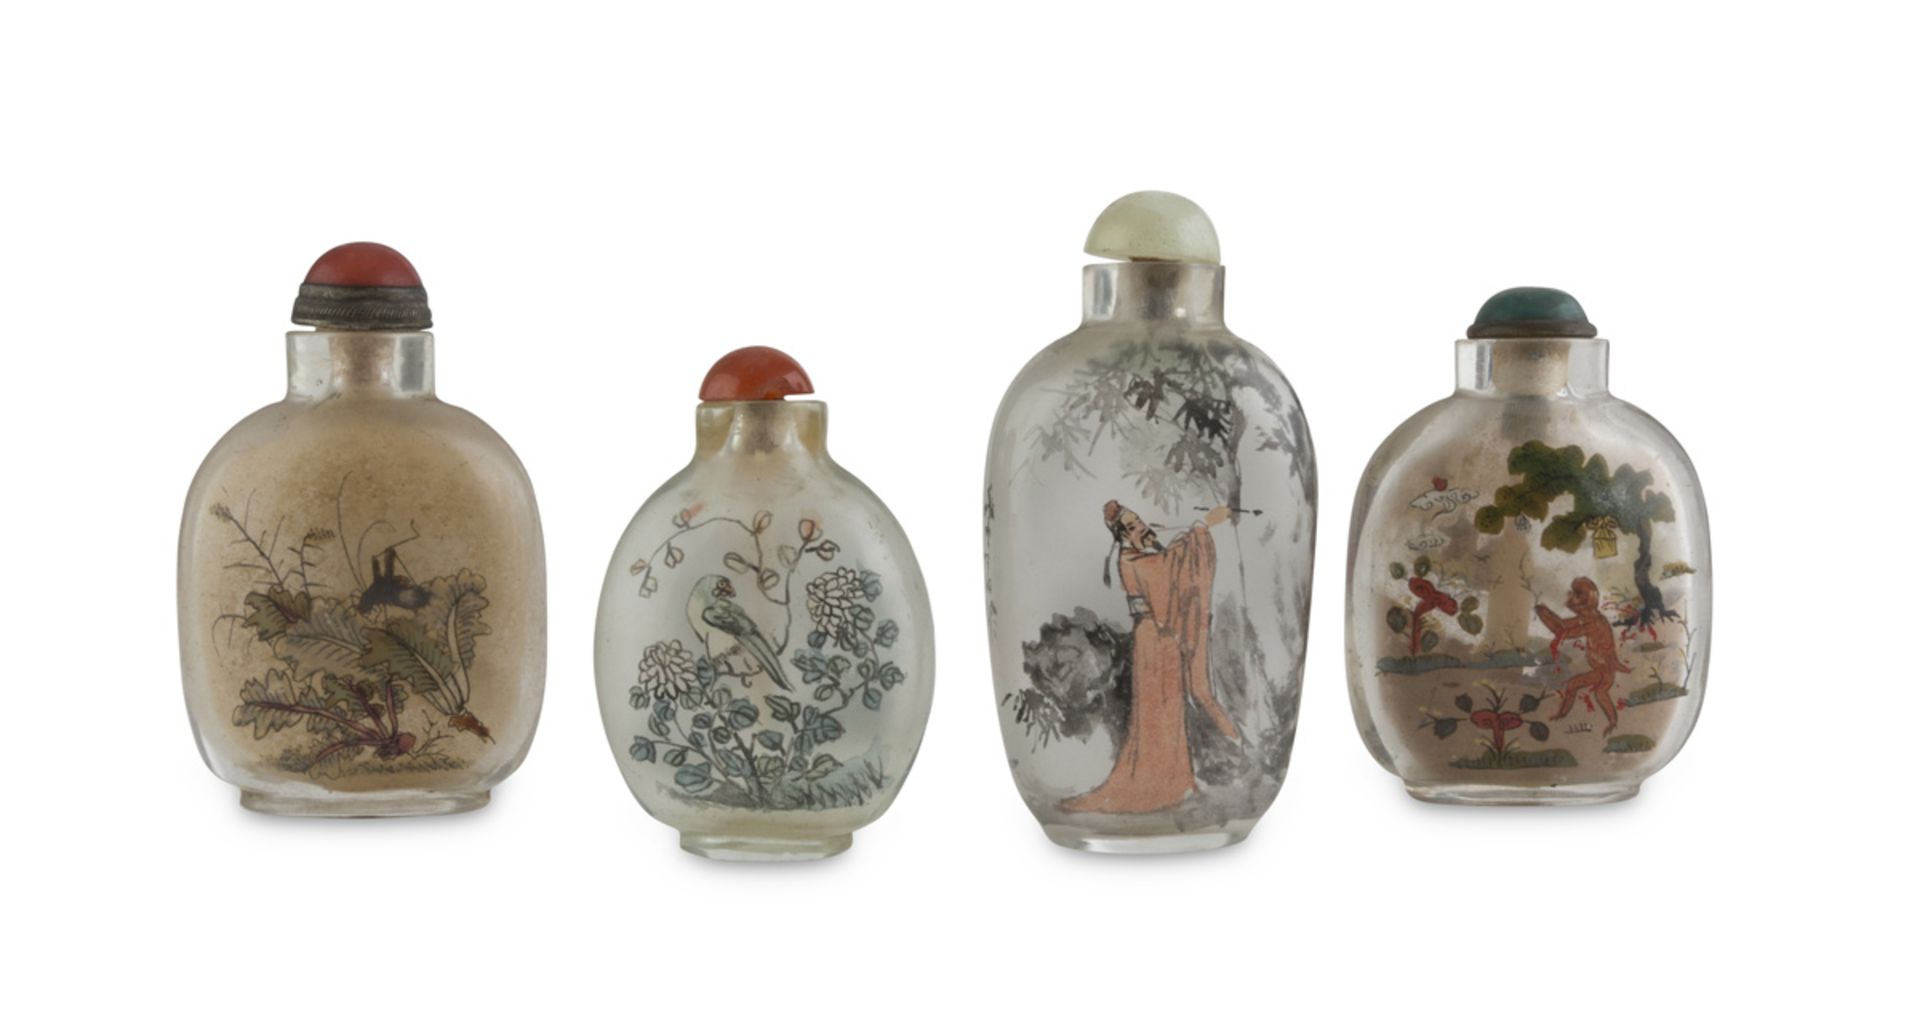 FOUR SNUFF BOTTLE IN POLYCHROME PAINTED GLASS, CHINA 20TH CENTURY decorated with representation of